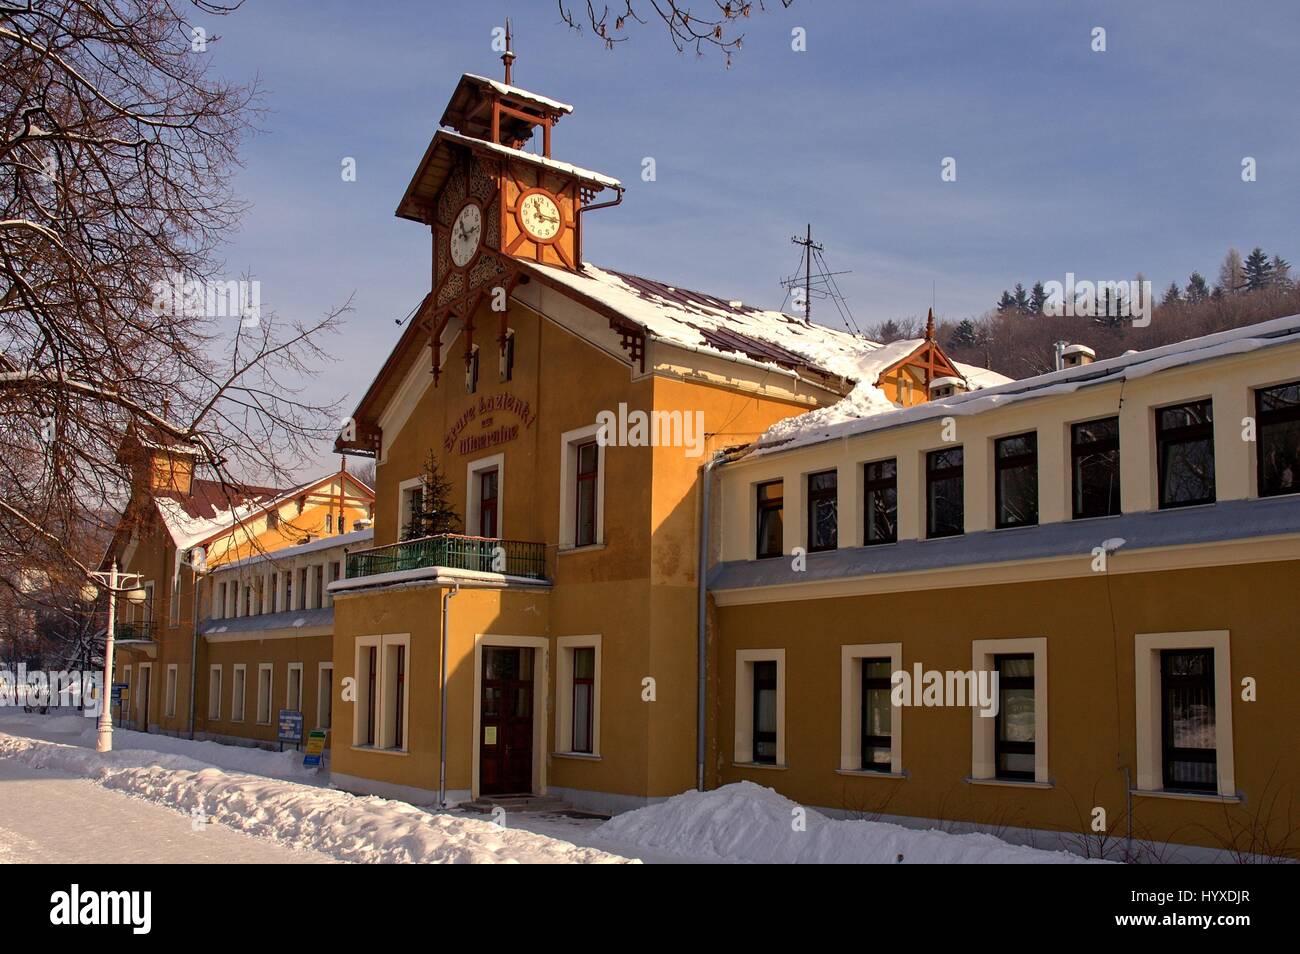 Poland, Krynica, The House of Old Mineral Bath Stock Photo